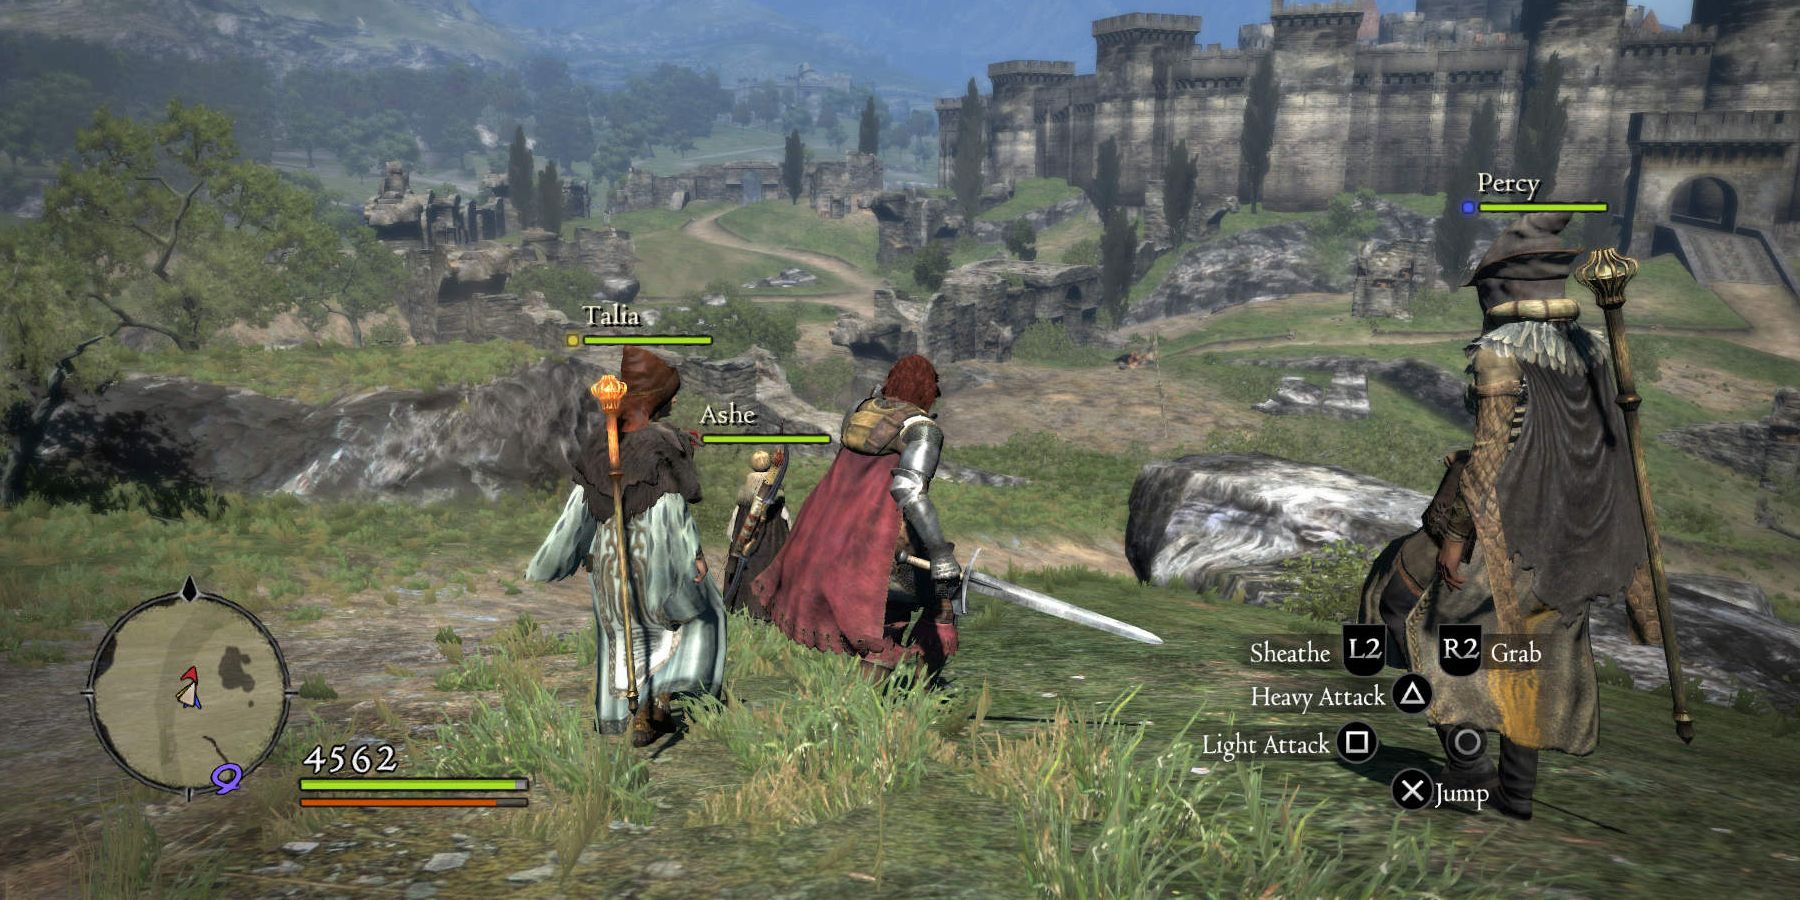 A traveling party walks through the fields in the game Dragon's Dogma: Dark Arisen